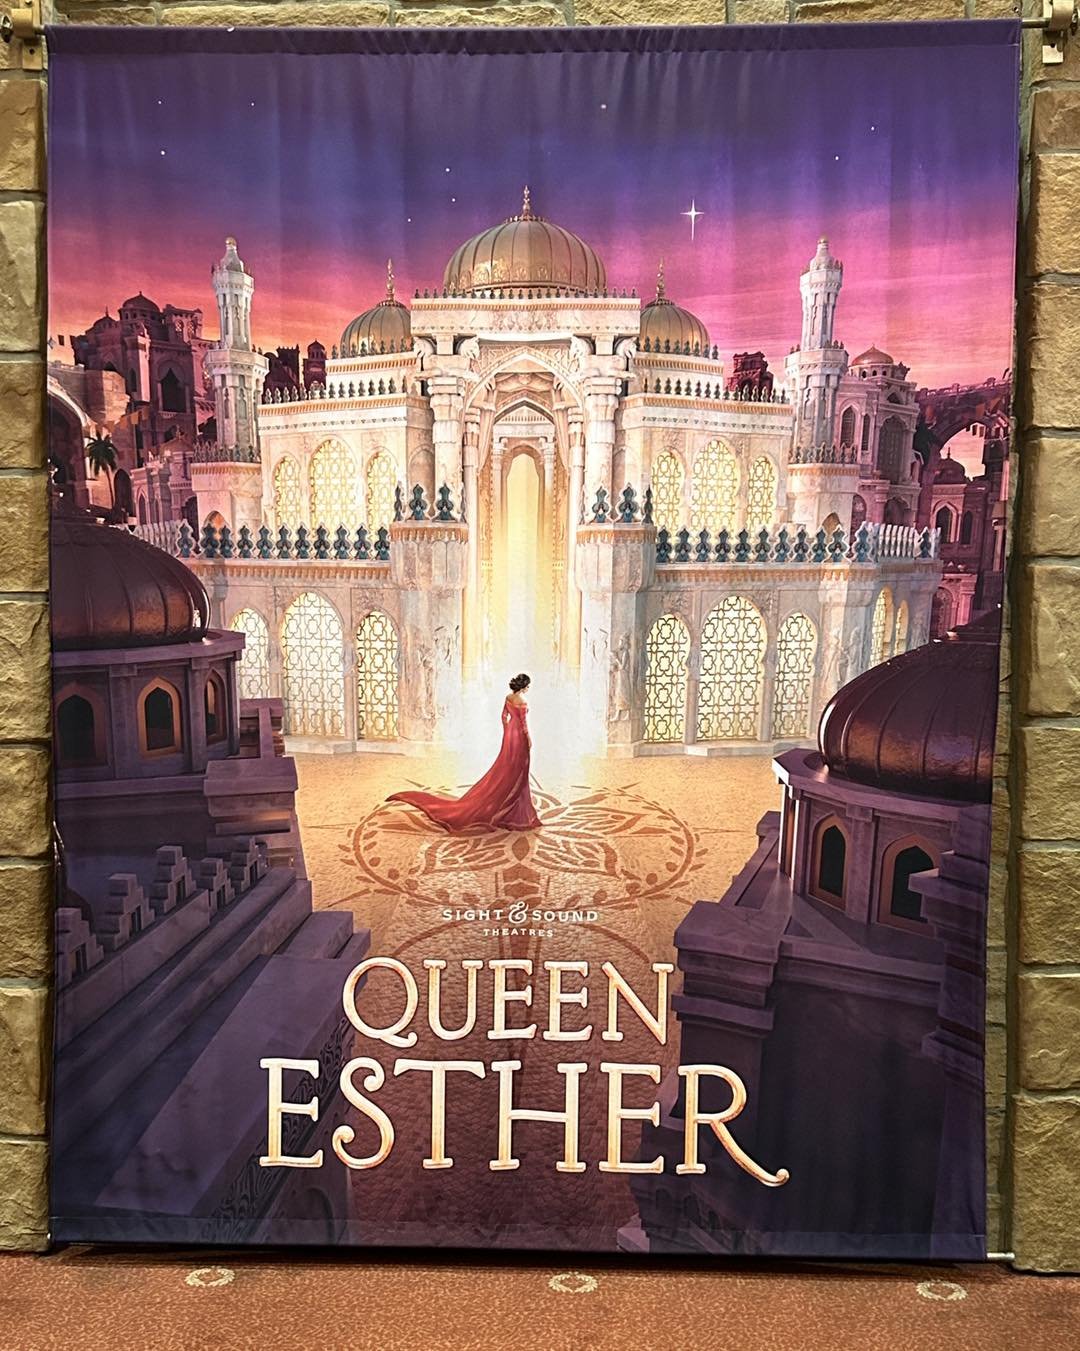 Queen Esther at the Sight &amp; Sound Theatre was spectacular! The sets, the costumes, live horses and llamas and birds oh my! Most of all, the passion and belief in the message they are sending shines through the performers in their astonishing voca